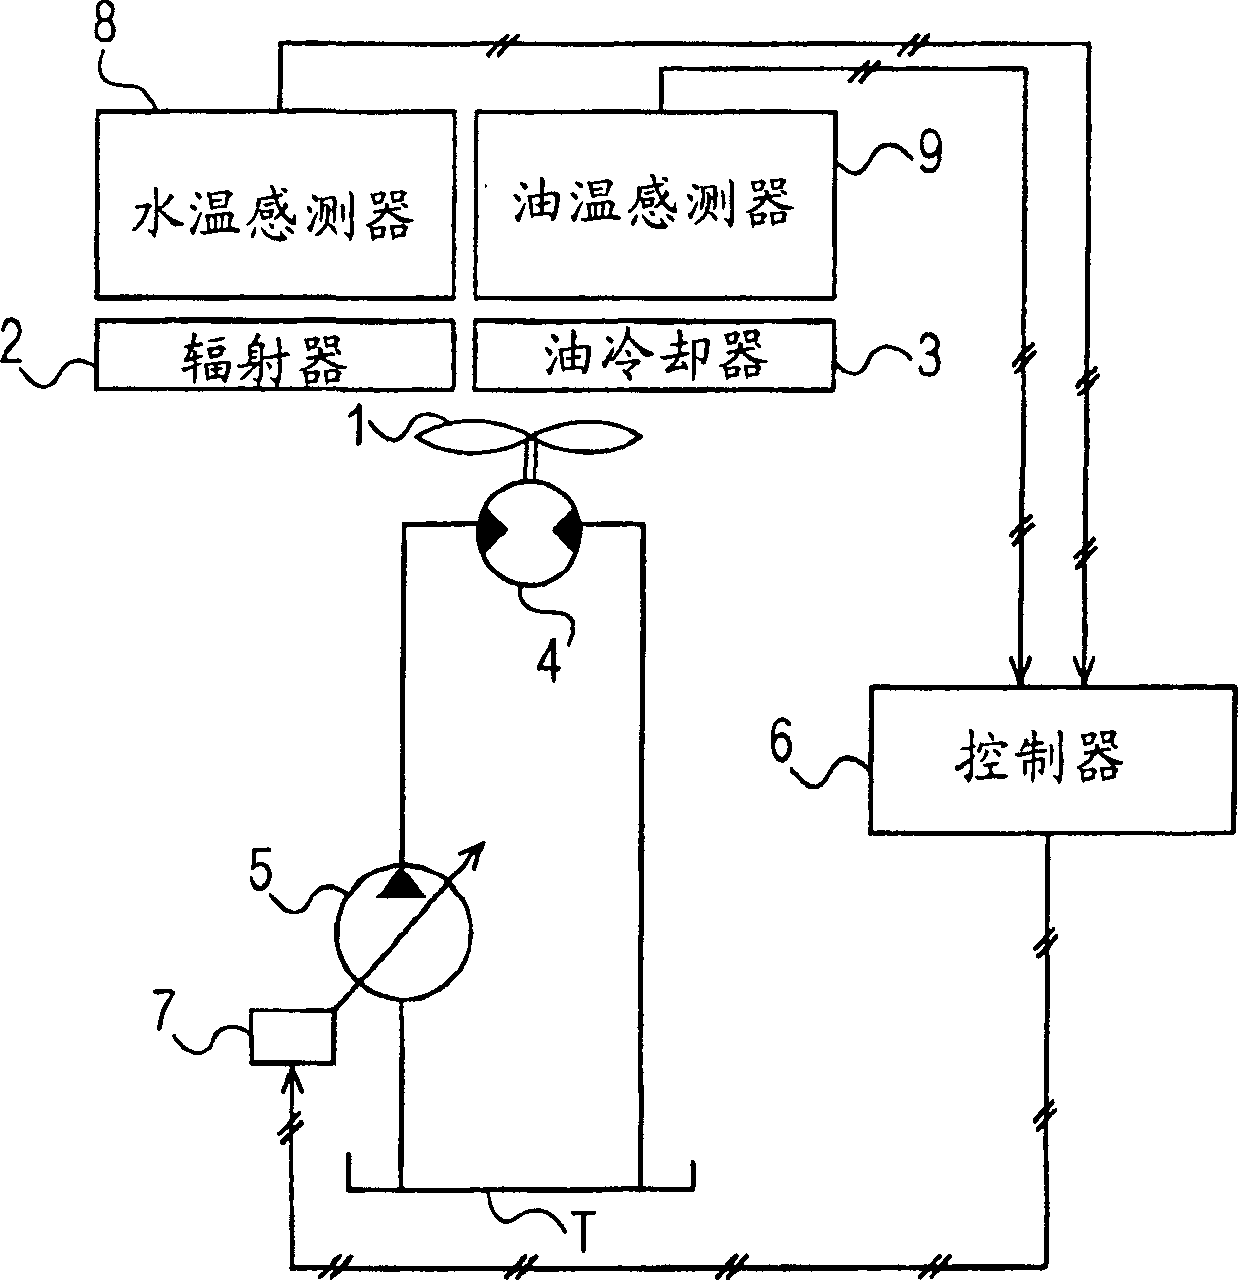 Controlling system for cooling fan